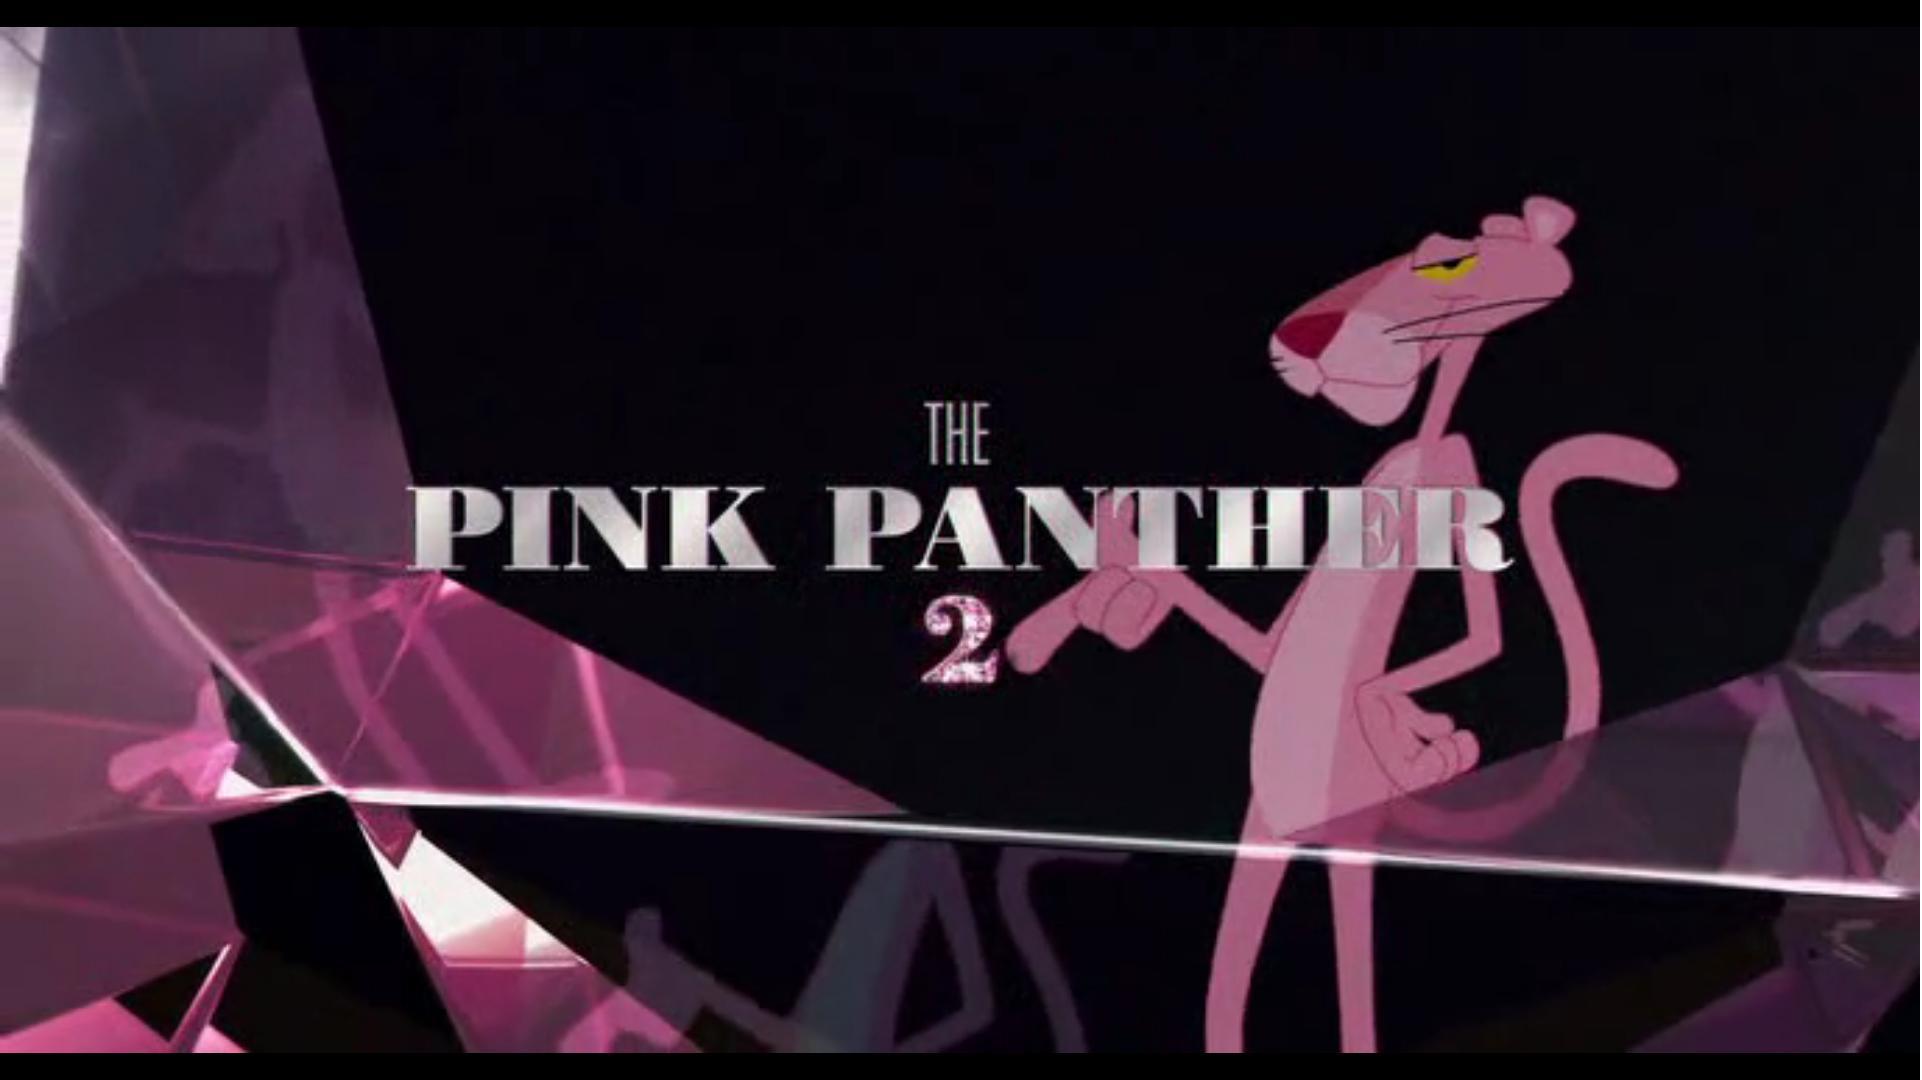 Pink Panther Lovers image Amazing Style.JPG HD wallpapers and